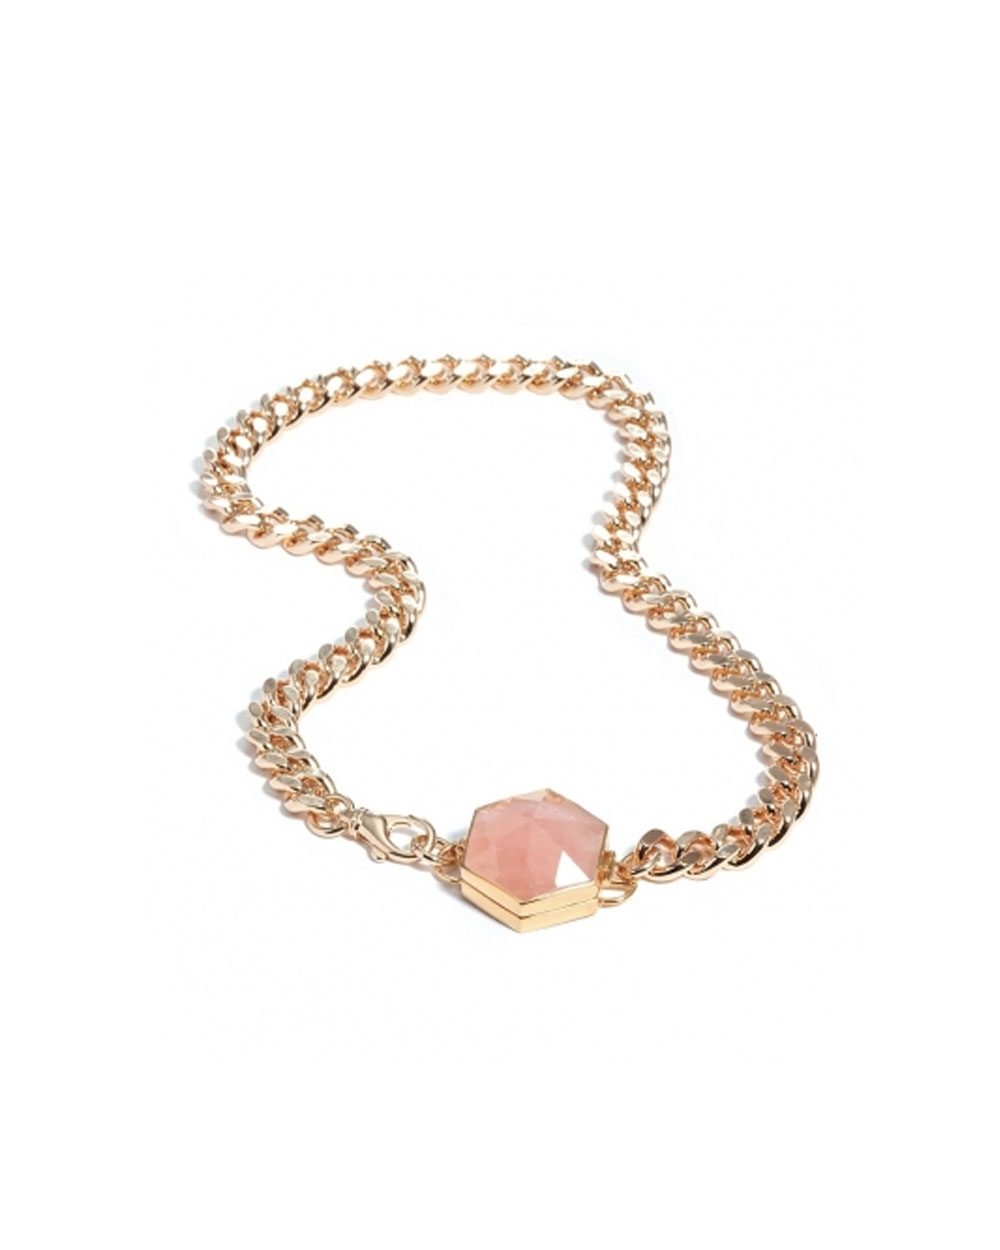 Cathy Pope necklace